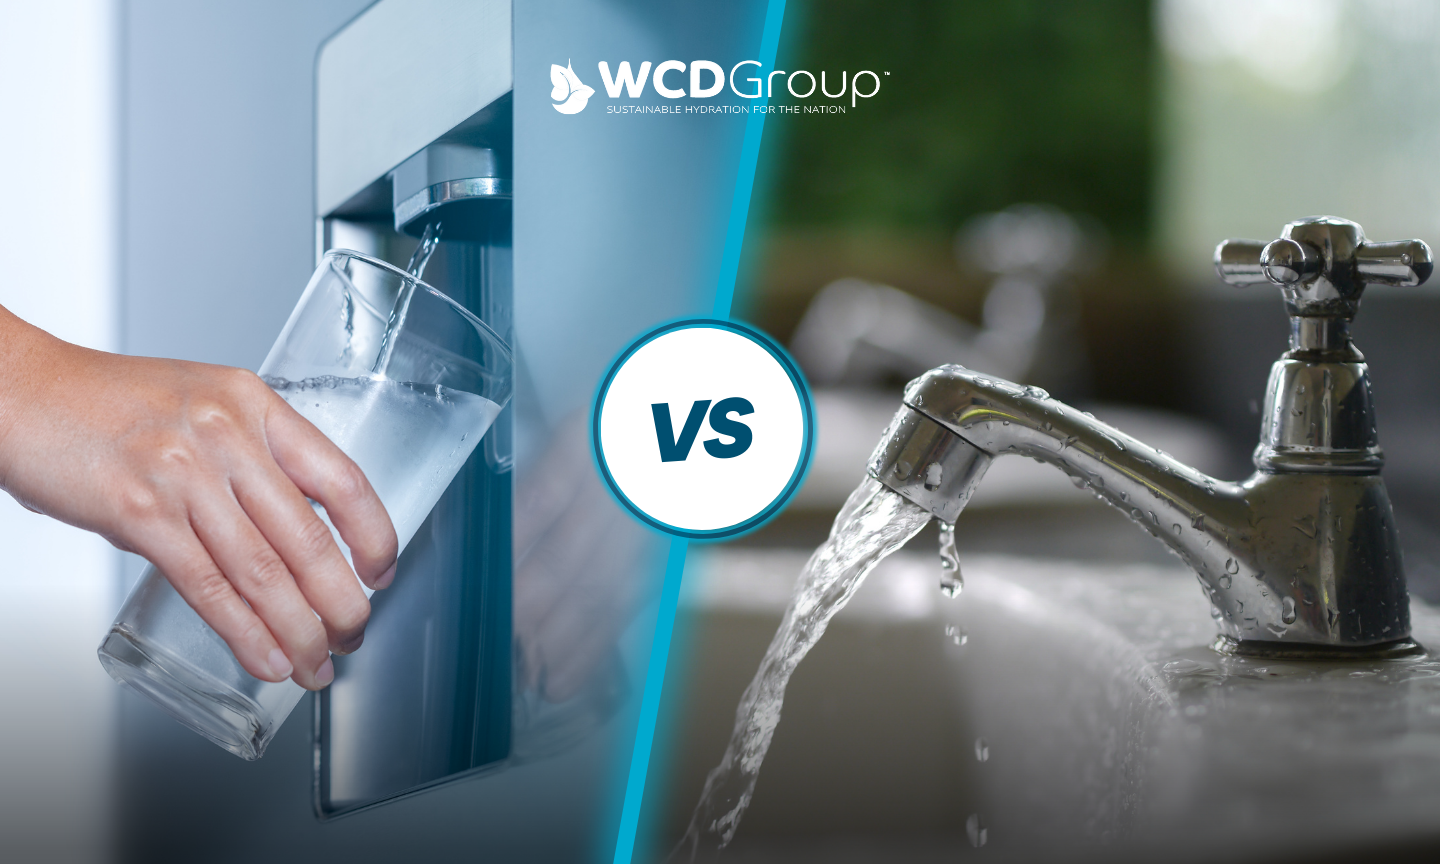 Water Dispenser vs. Tap Water: Which is Safer?